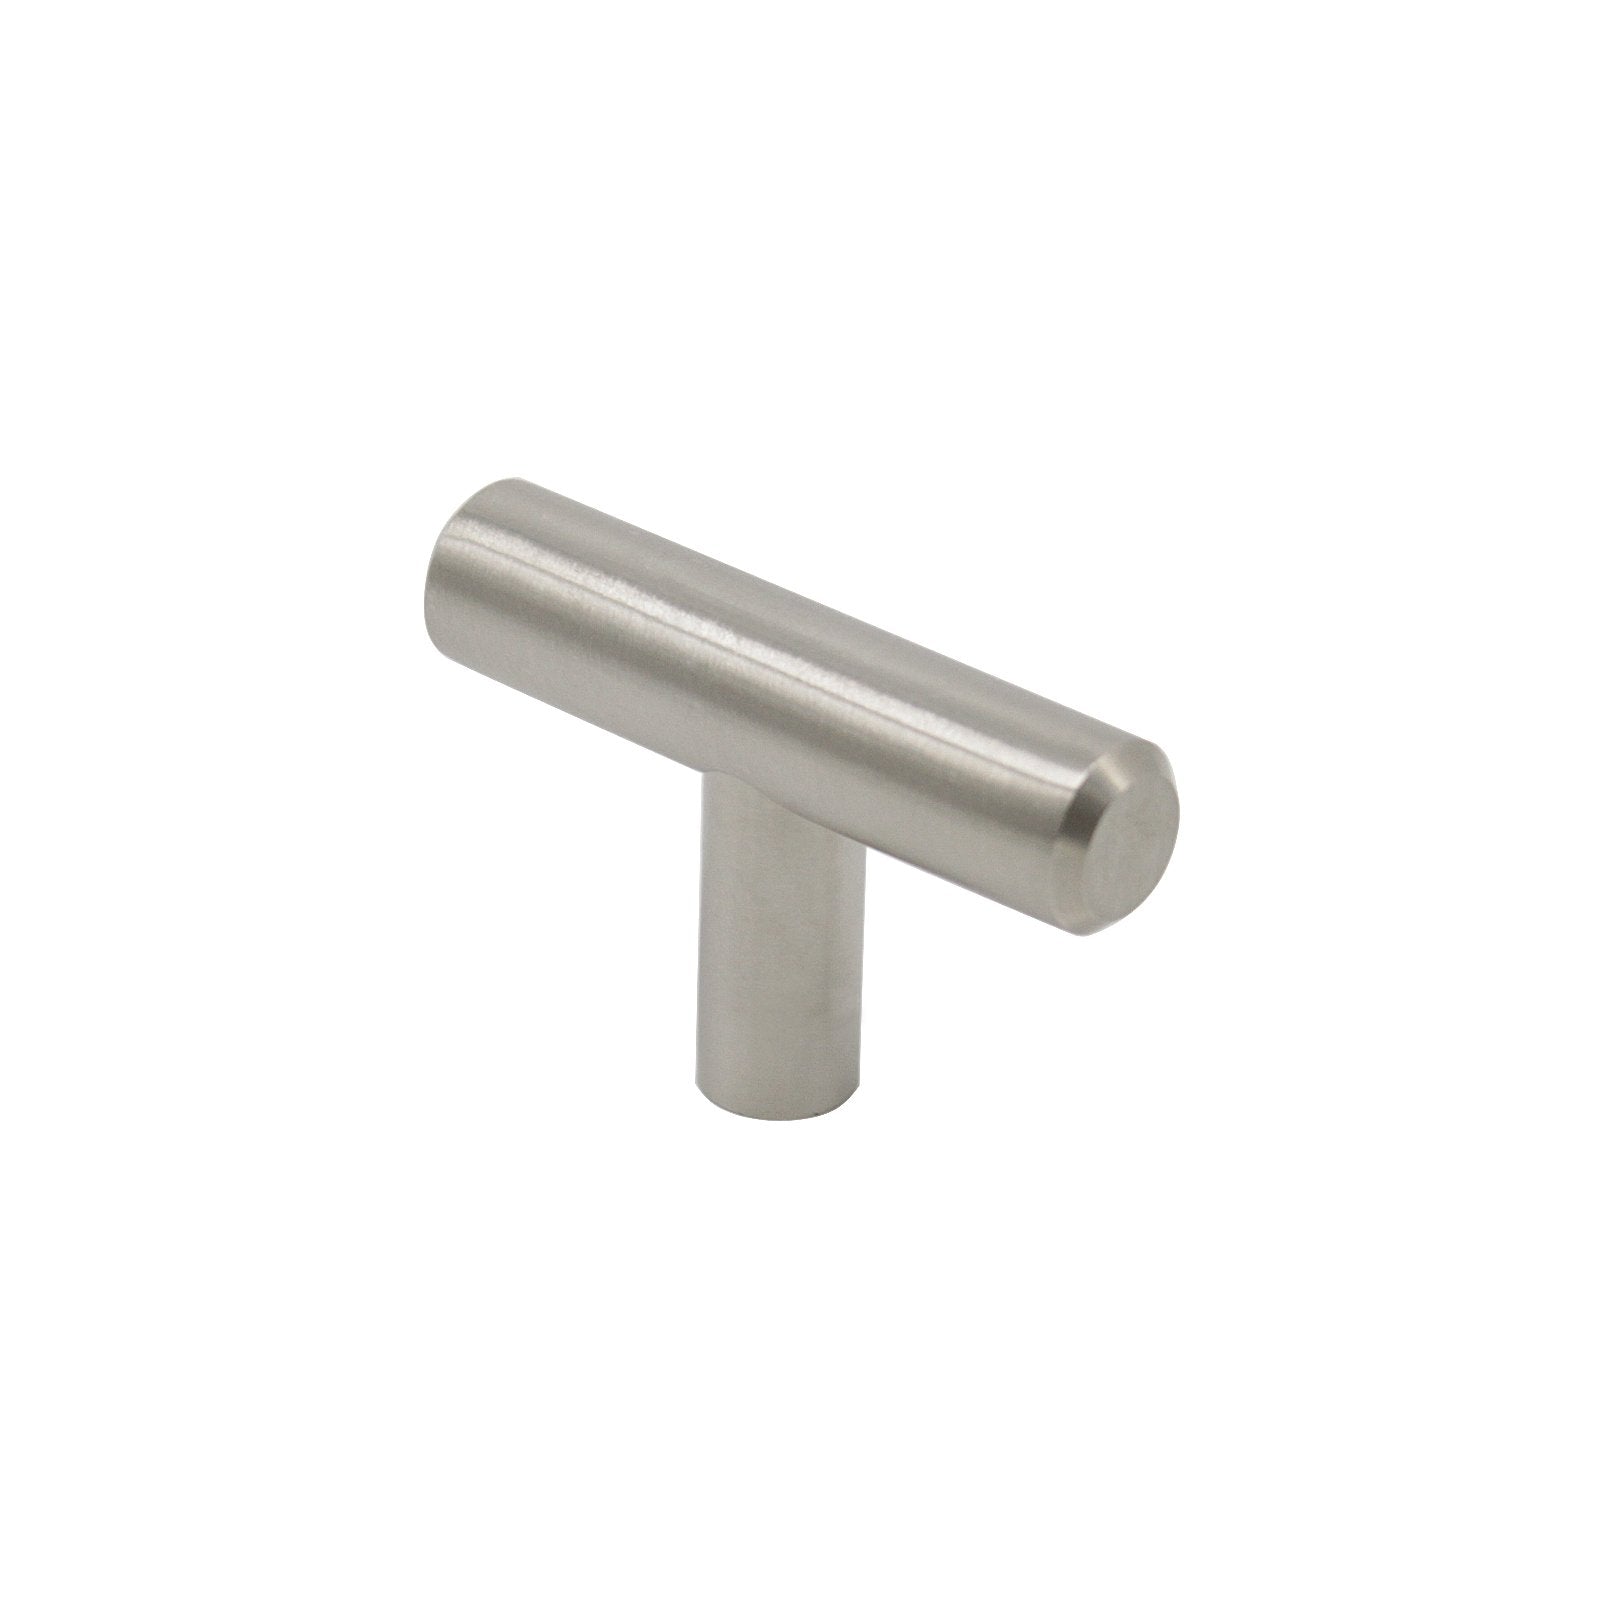 Euro T Bar Pulls 2inch 50mm Lenght Single Hole Solid Handles Brushed Stainless Steel Finish